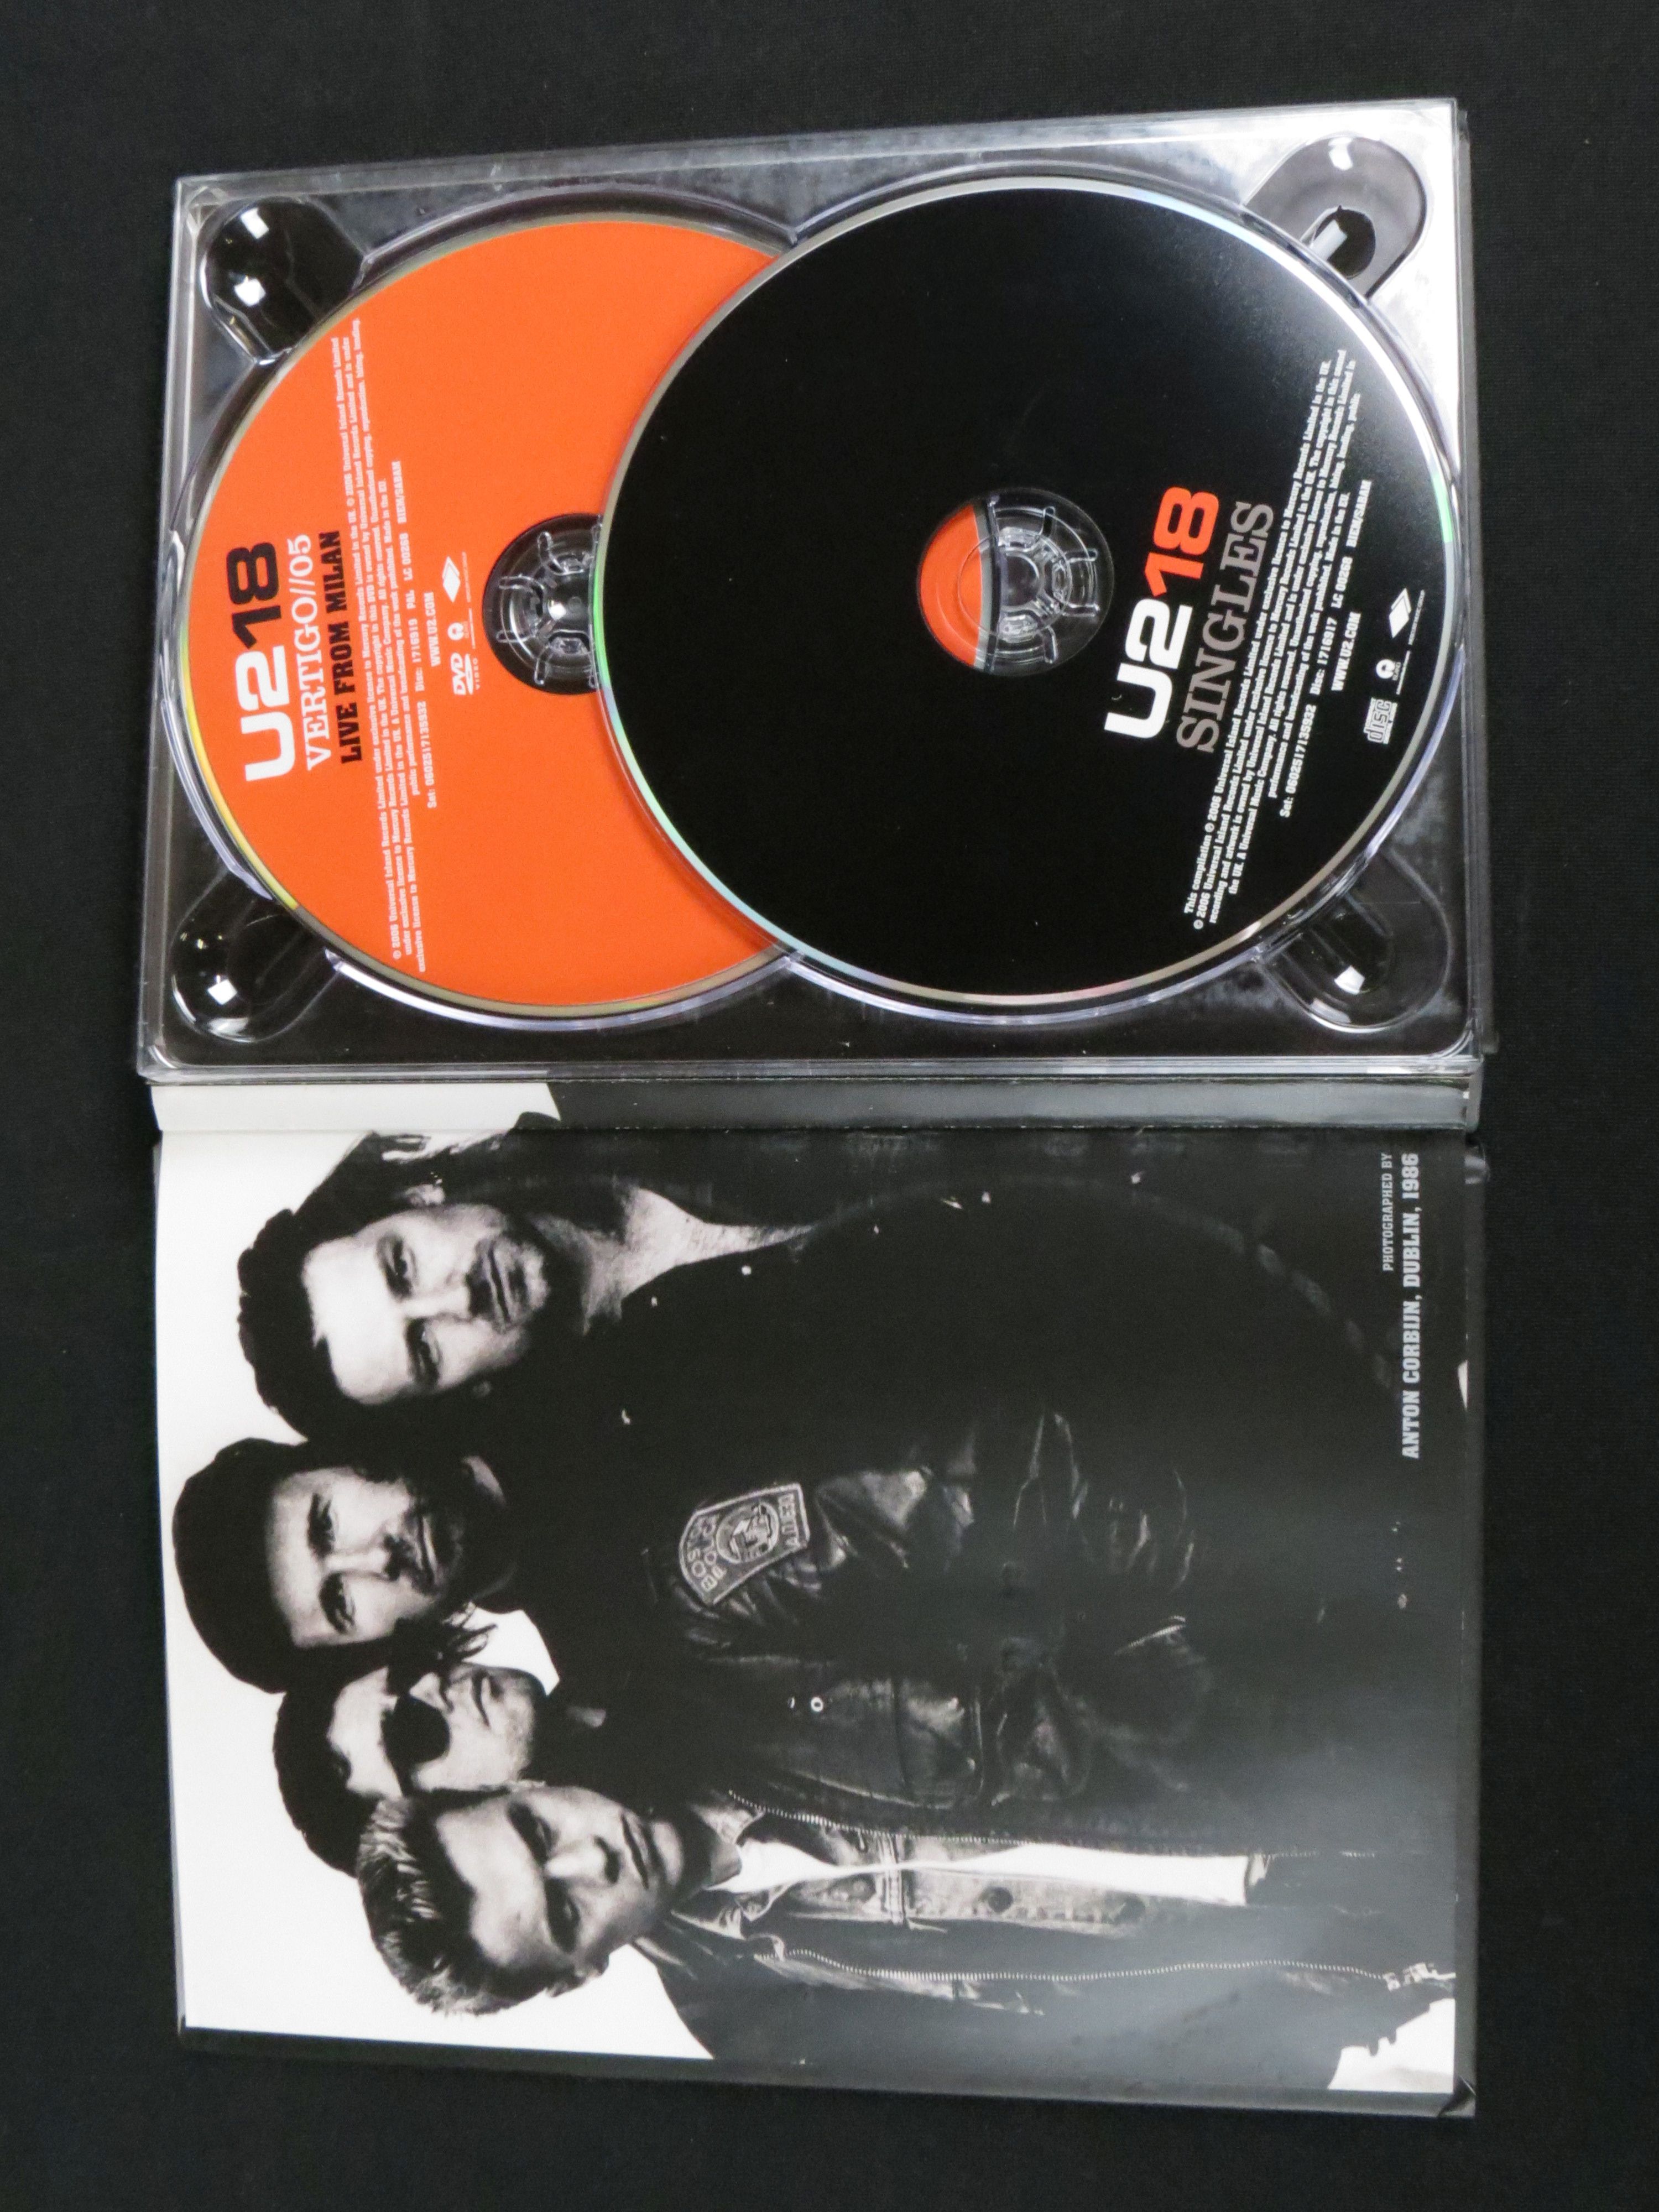 Music Autograph - U2 18 Singles Box Set signed to the cover by 3 of the band including Bono & - Image 3 of 3